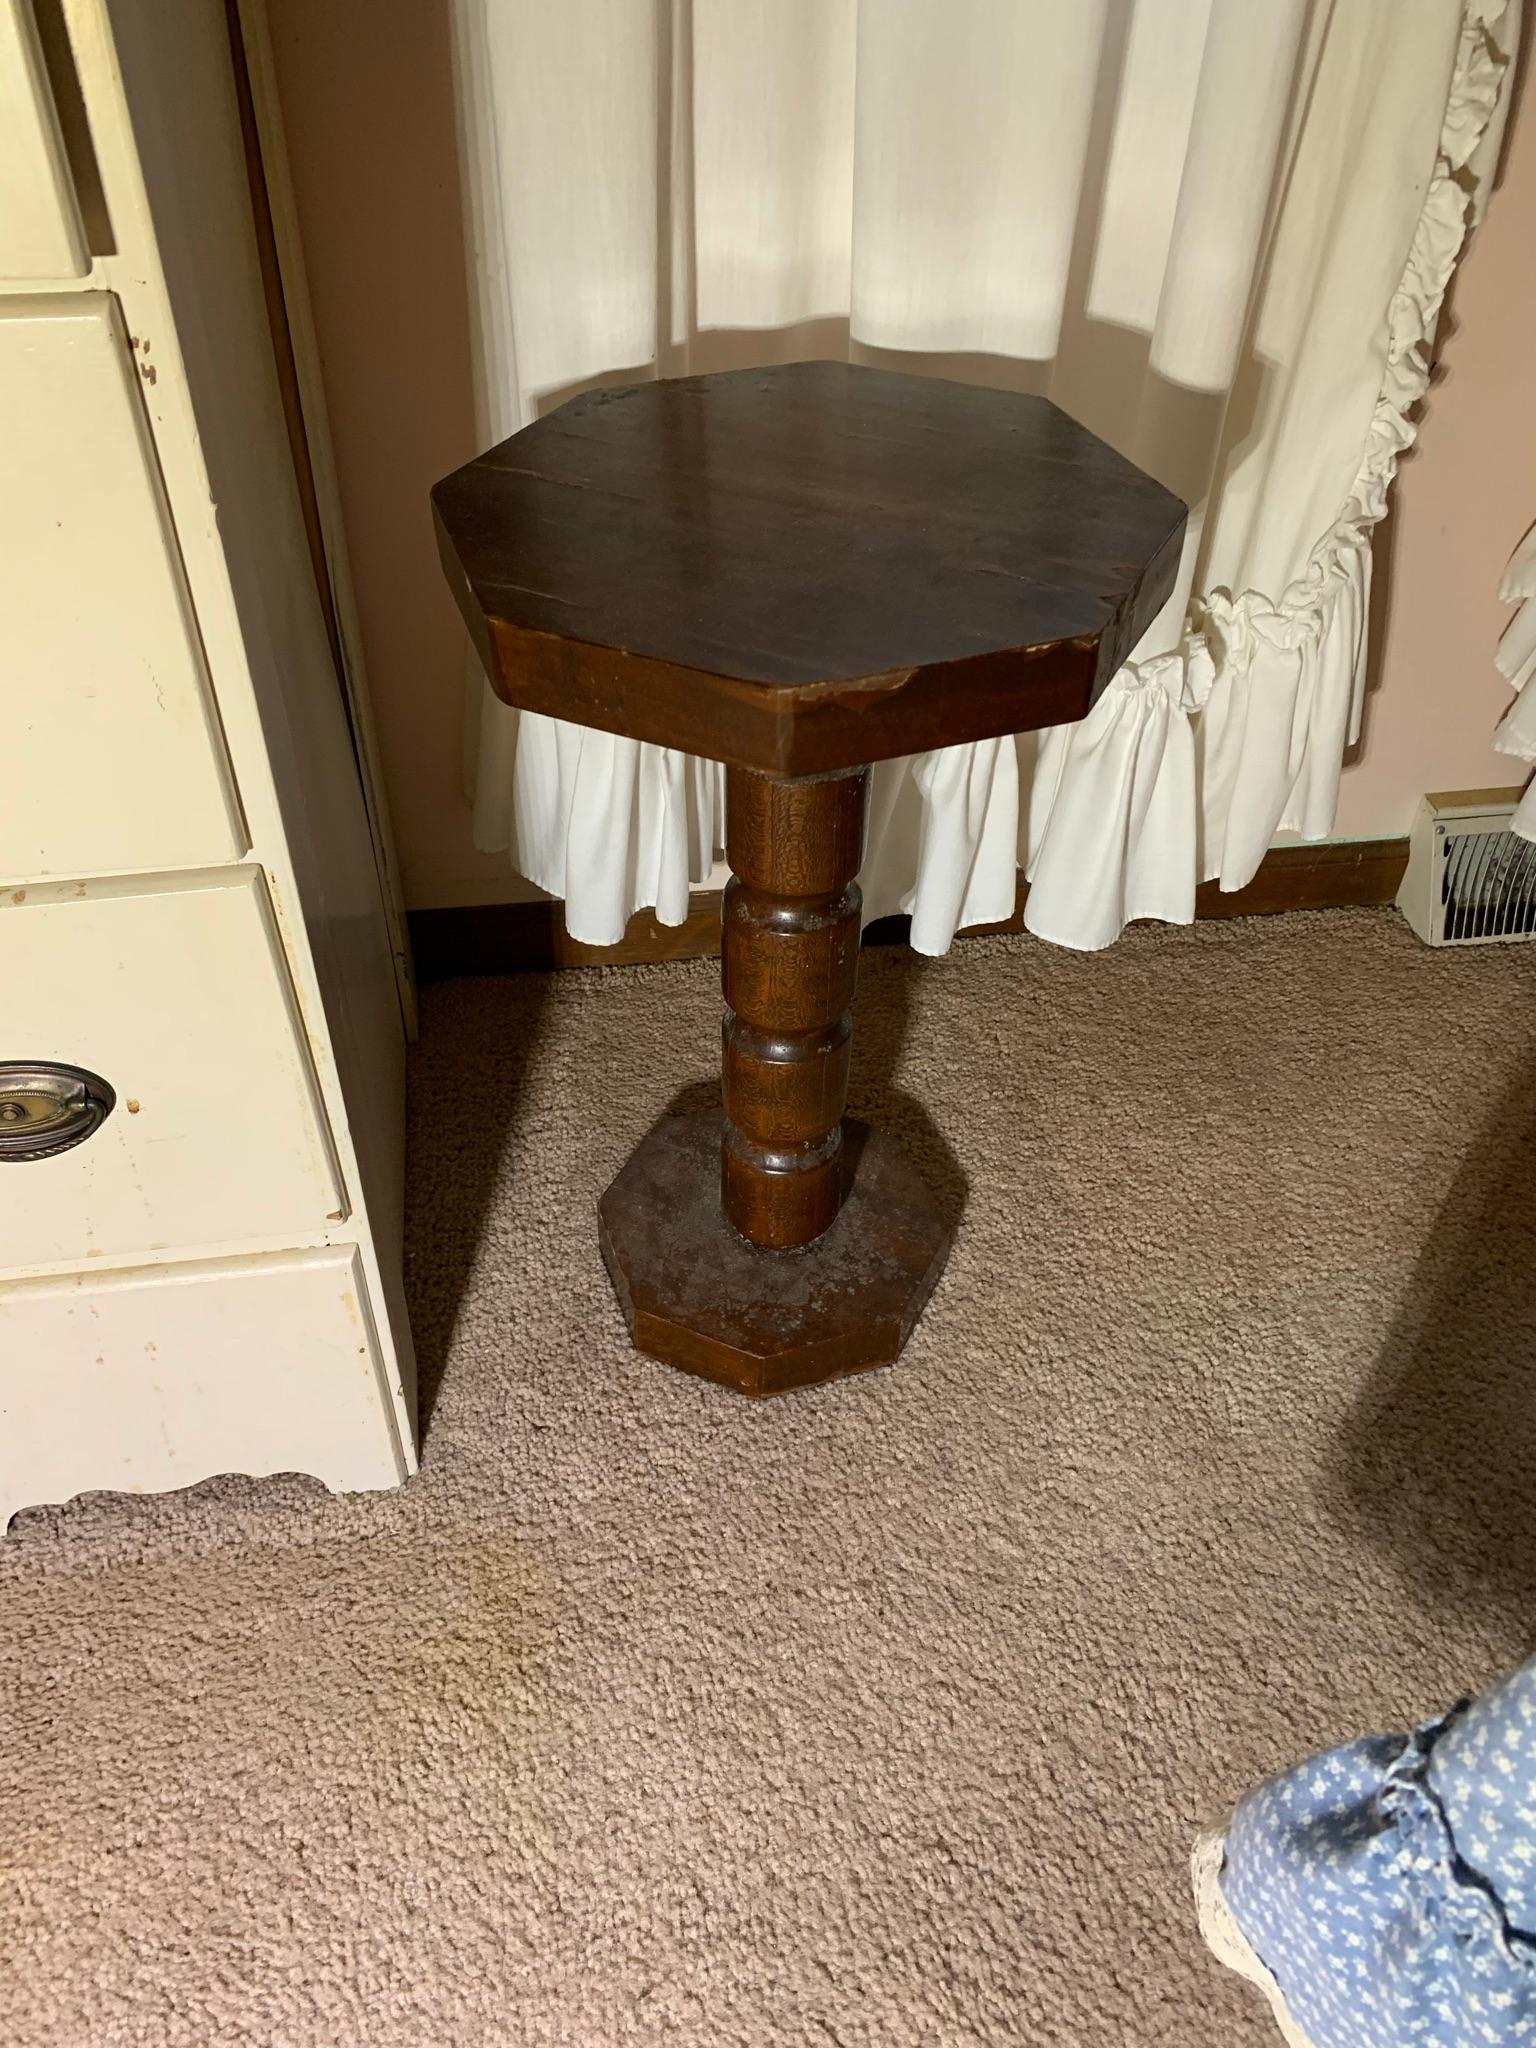 Bedroom Clean Out -  Single Beds, Mid Century Lamp, Desk, Closet & More